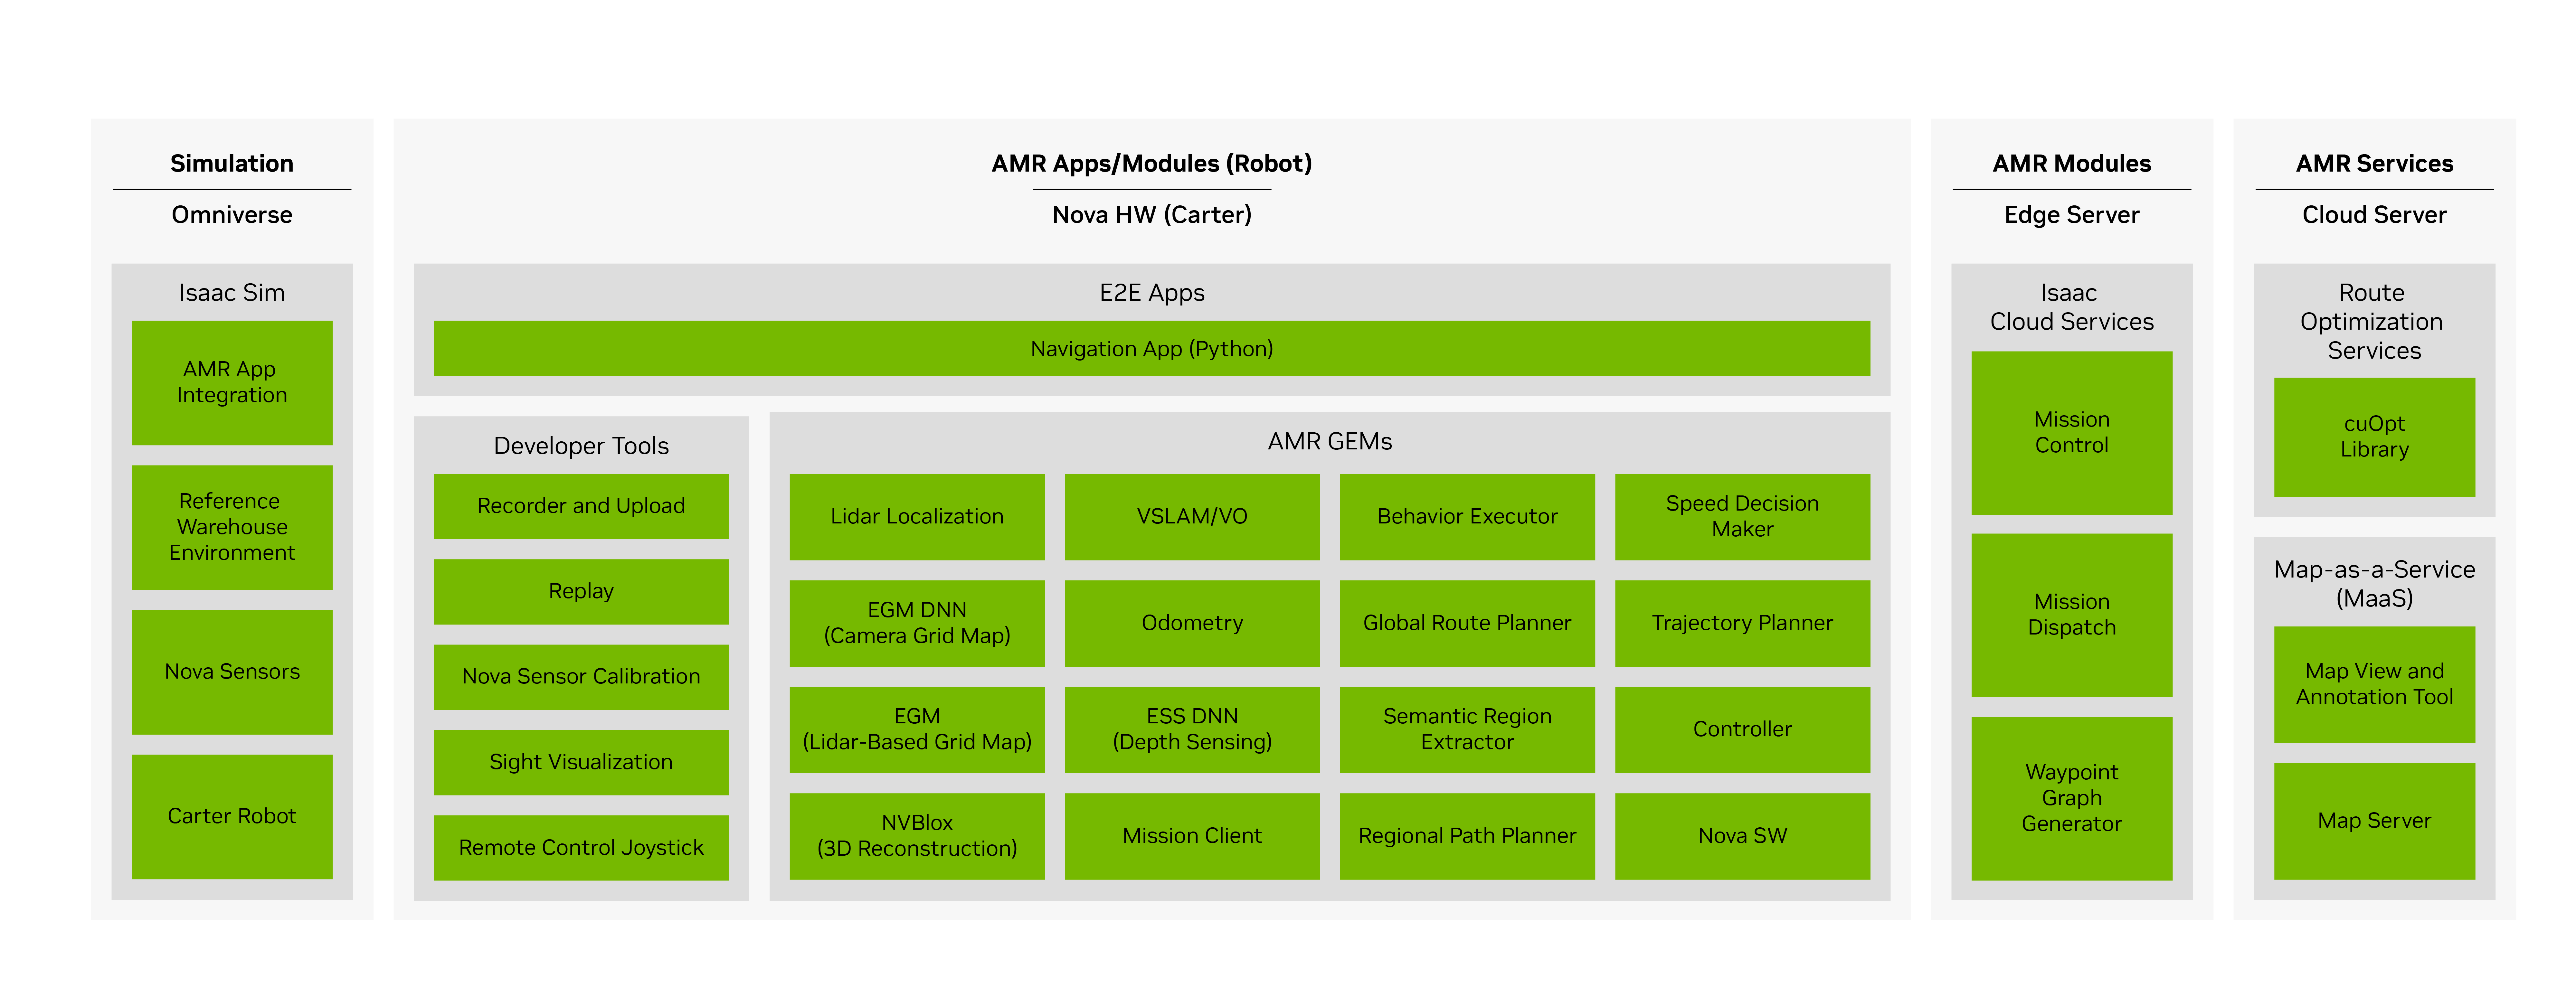  Isaac AMR Cloud Services and Map as a Service (MaSS)